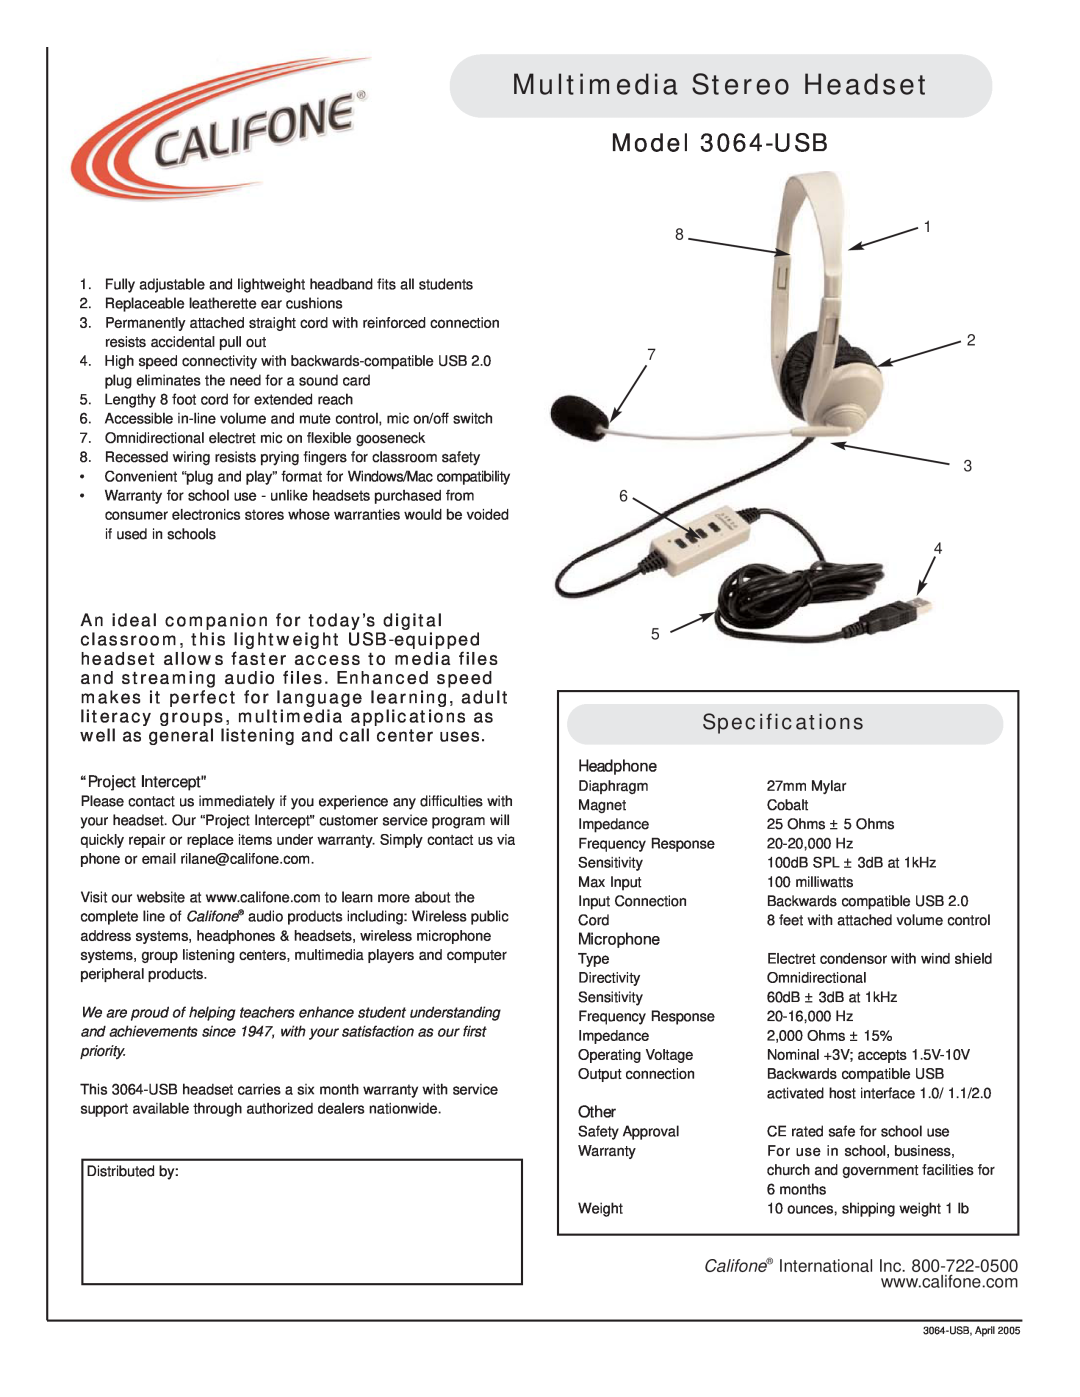 Califone specifications Multimedia Stereo Headset, Model 3064-USB, Specifications, “Project Intercept, Headphone, Other 